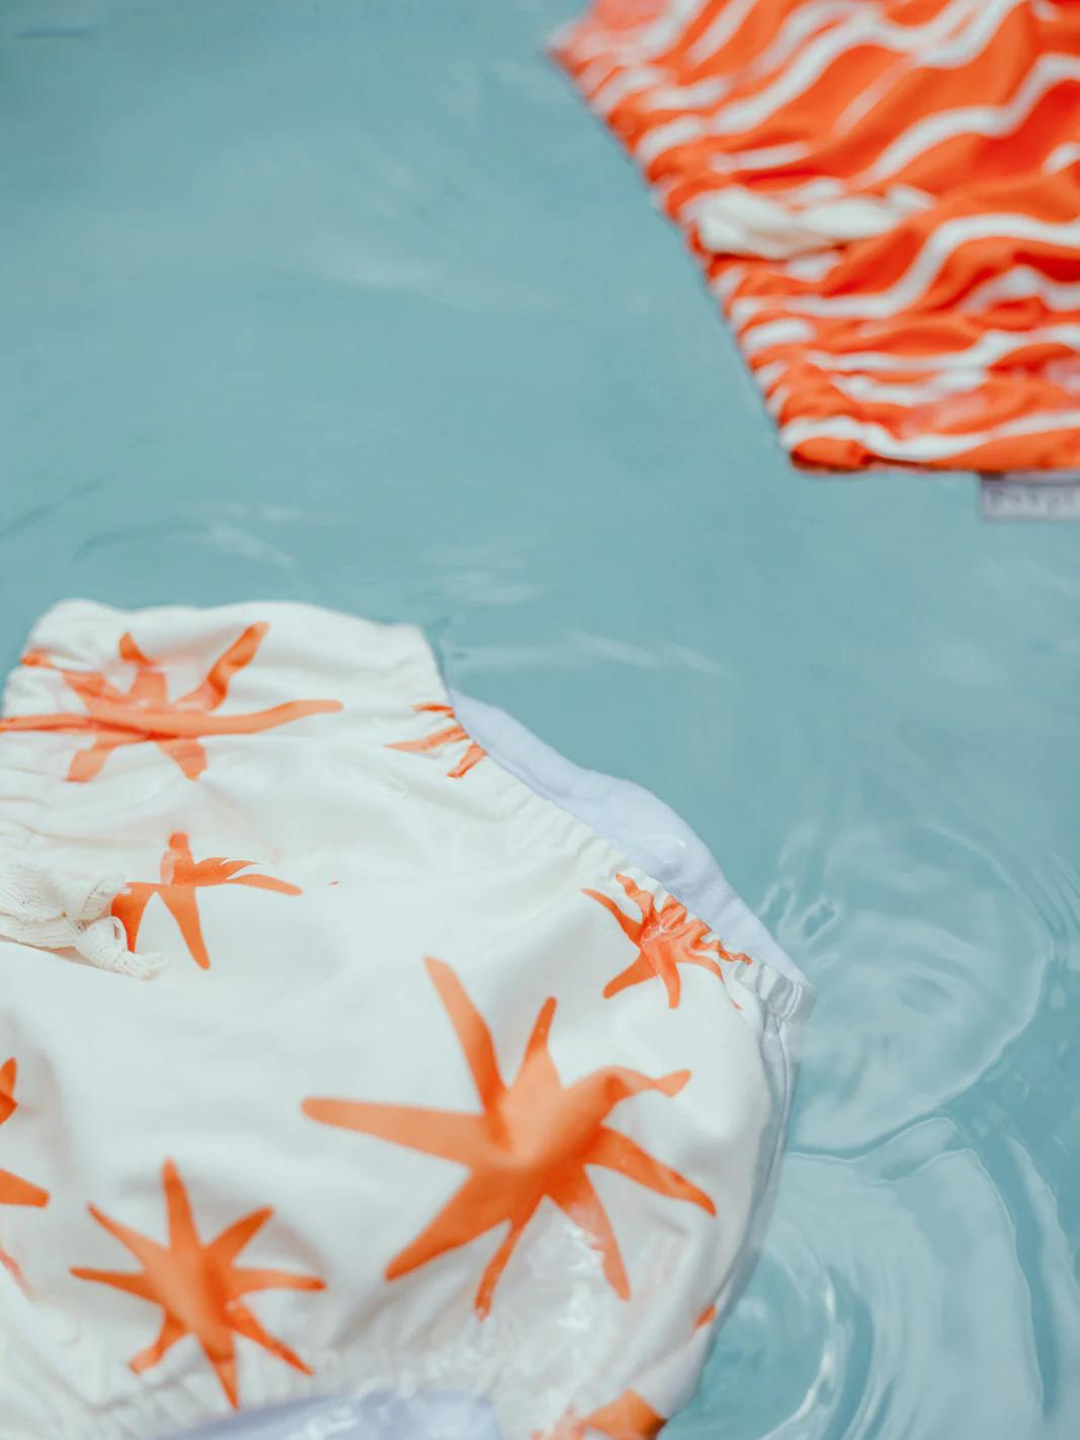 Capri | The front view of the swim diaper with an elastic waist with a tie and elastic leg holes. The diaper is a cream color with orange stars shapes all over. It is floating in a pool with the Spaghetti Swim Diaper.